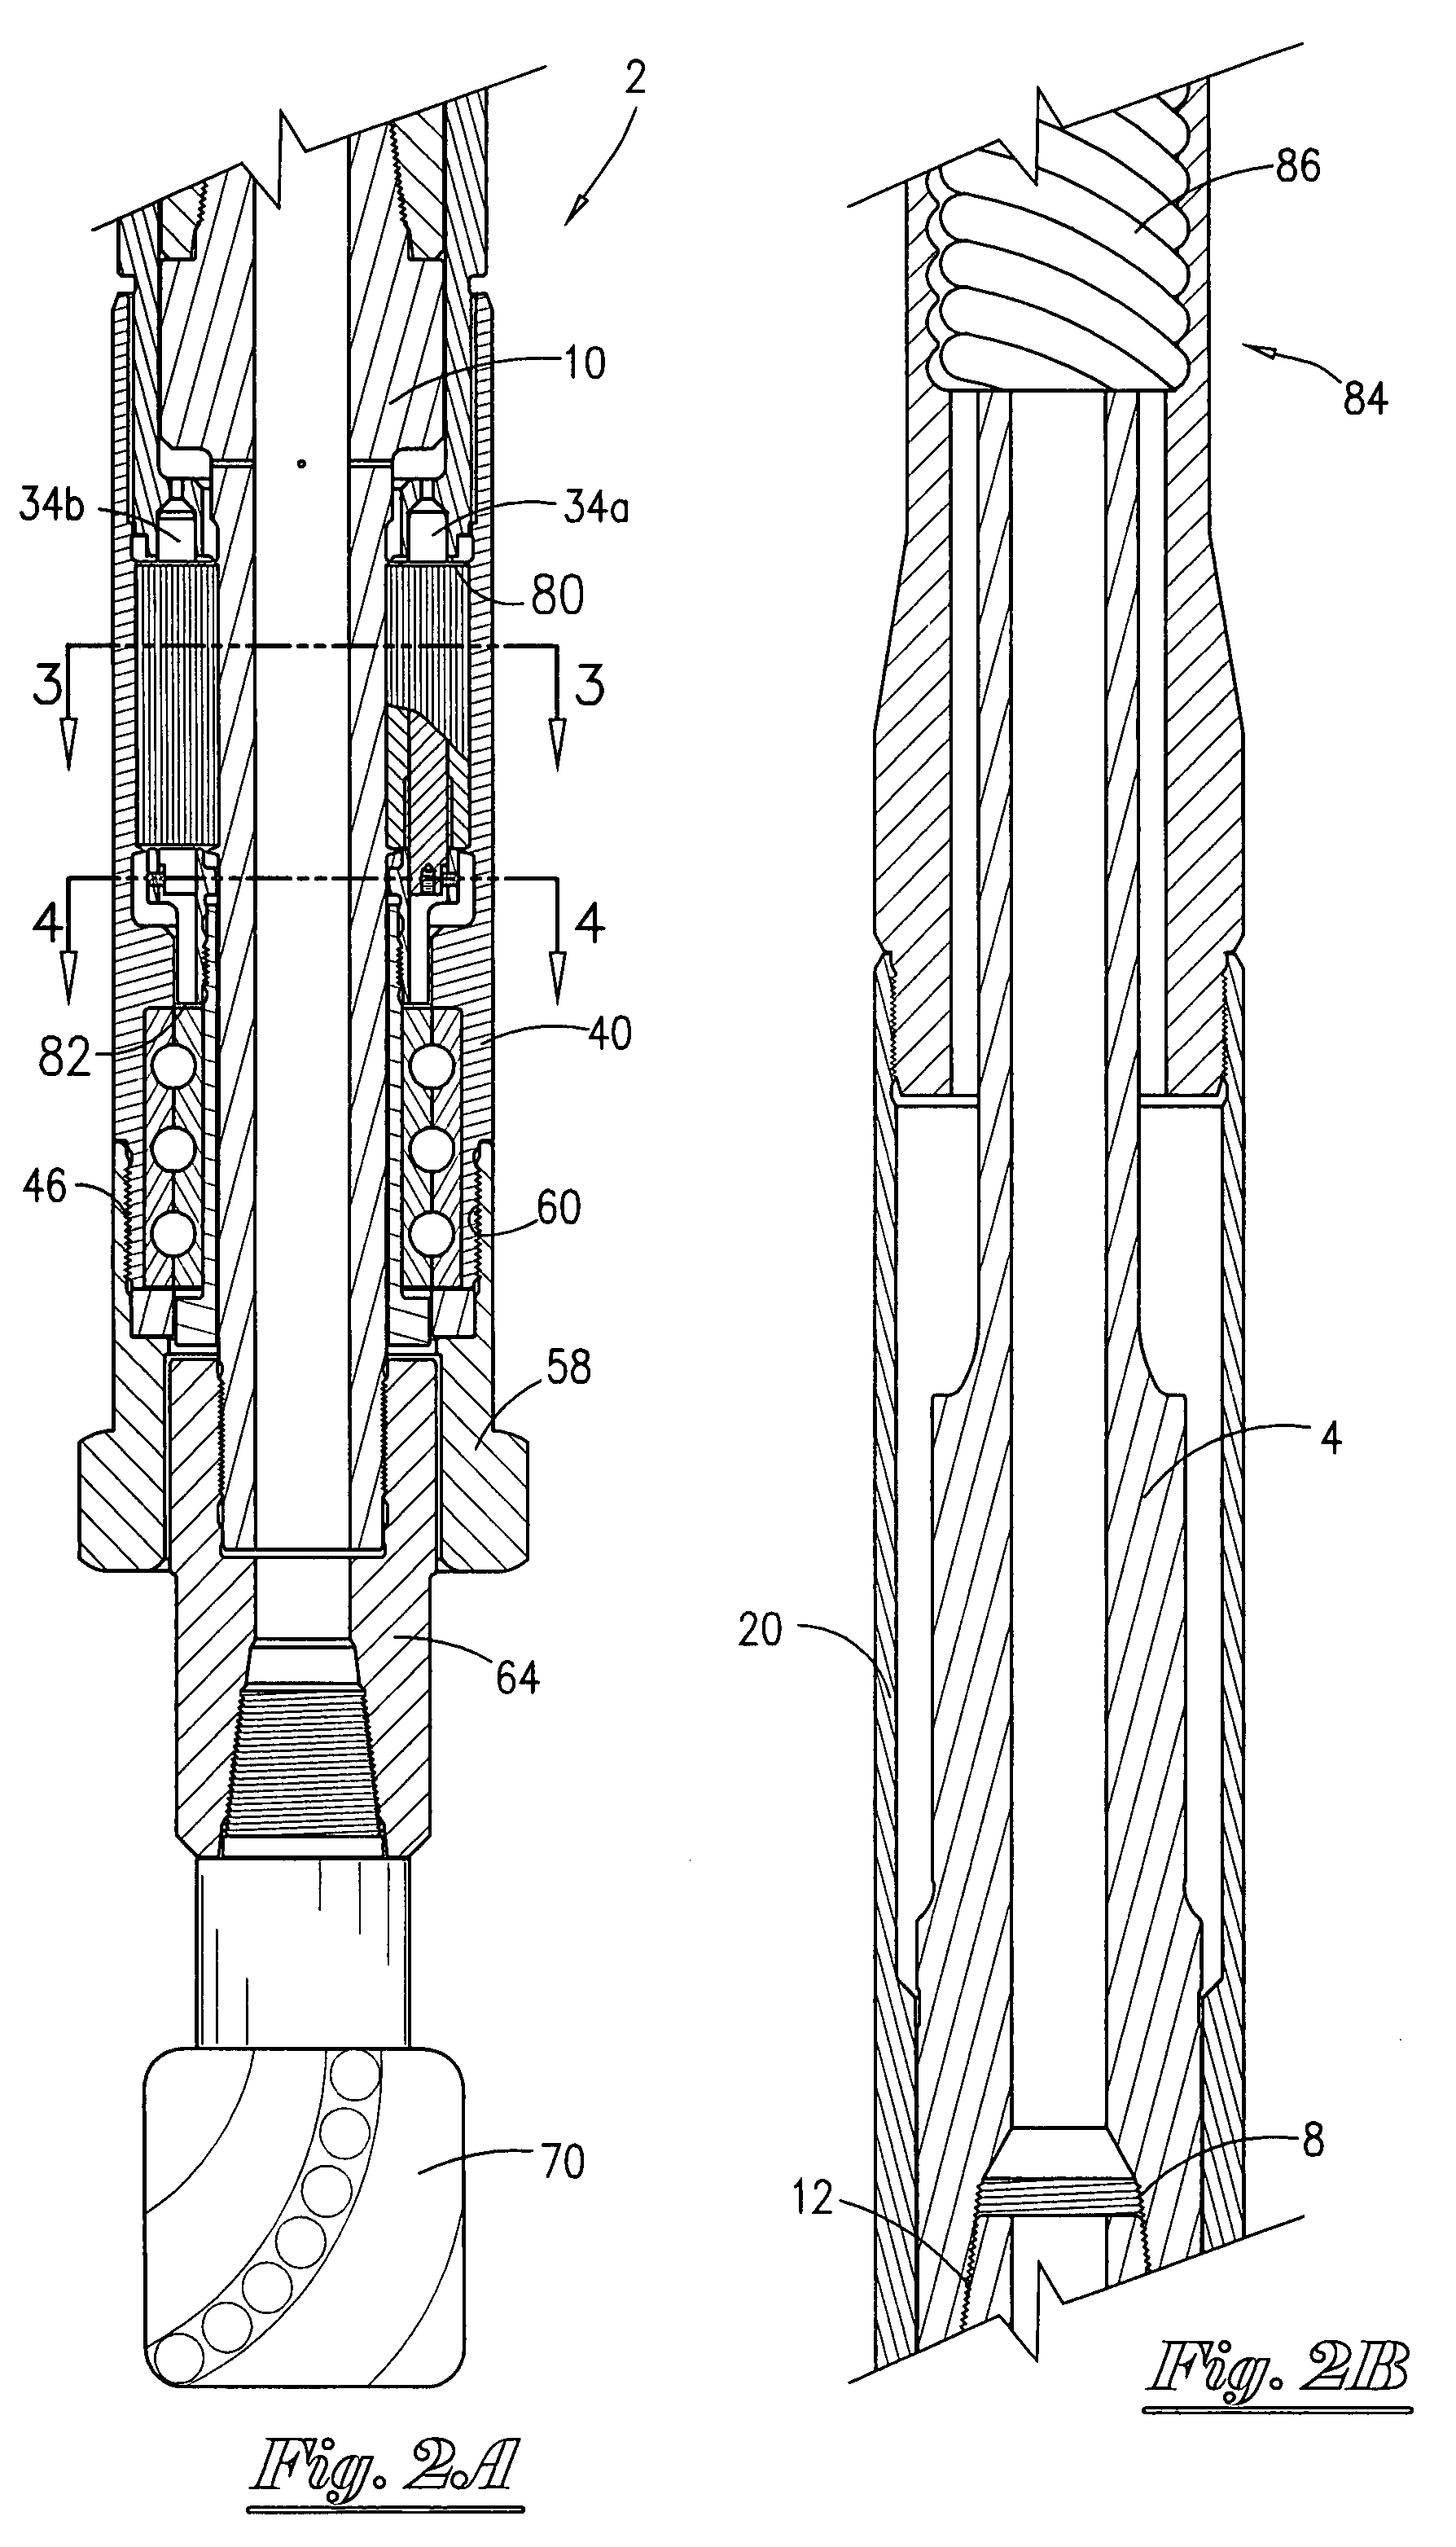 Drilling apparatus and system for drilling wells